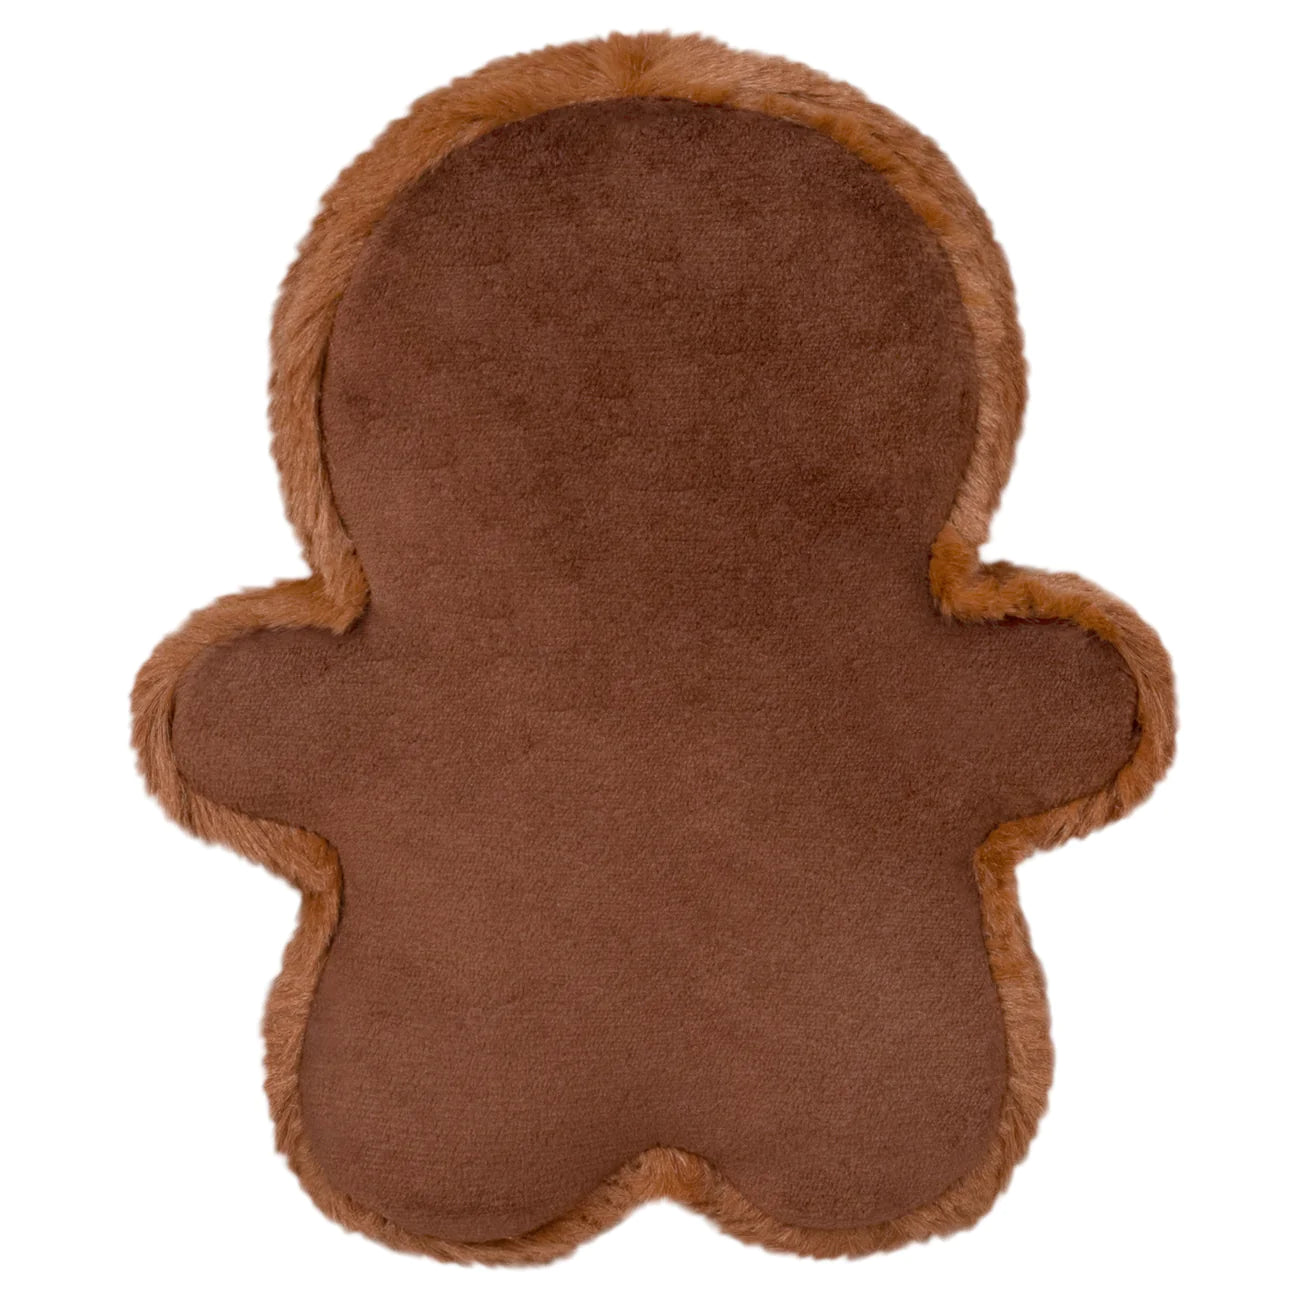 Squishable Snacker Gingerbread Man